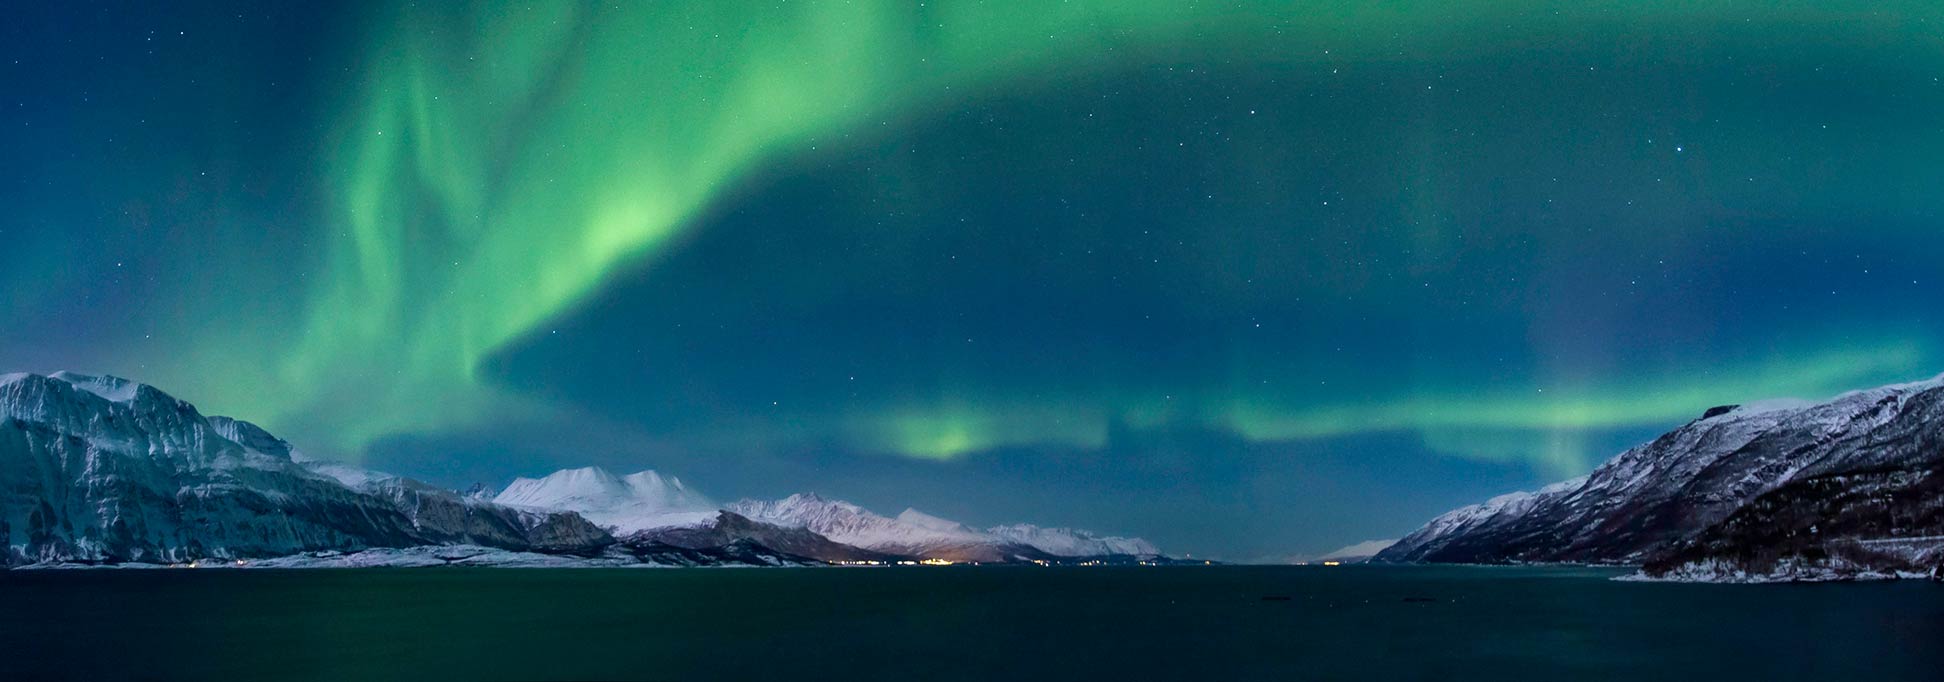 Northern lights (Aurora borealis) over the Lyngen fjord in Norway